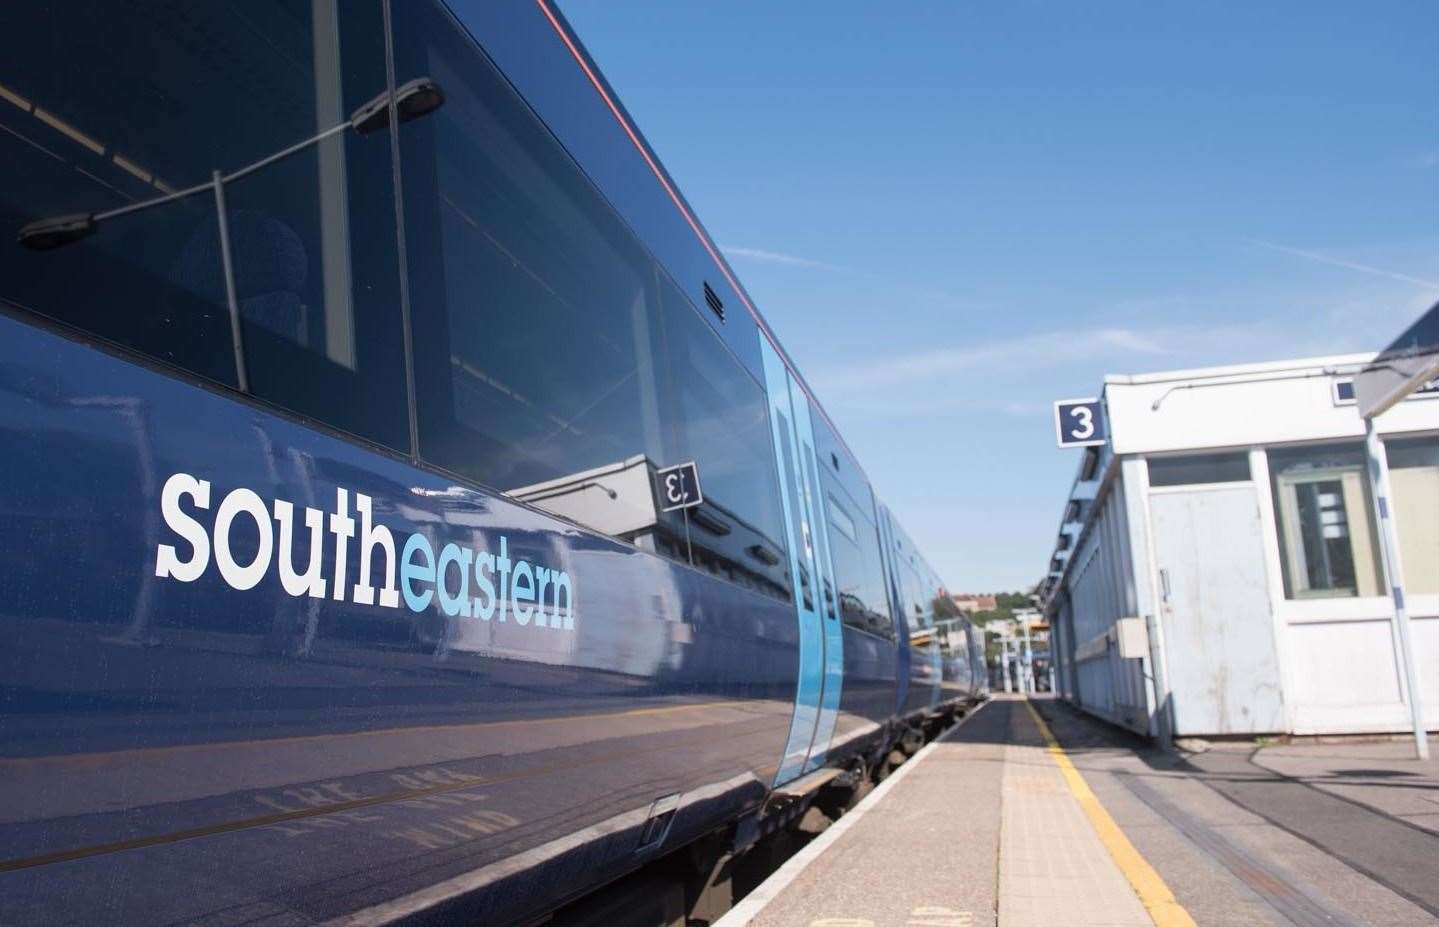 Southeastern train services between Tunbridge Wells and Hastings are being disrupted